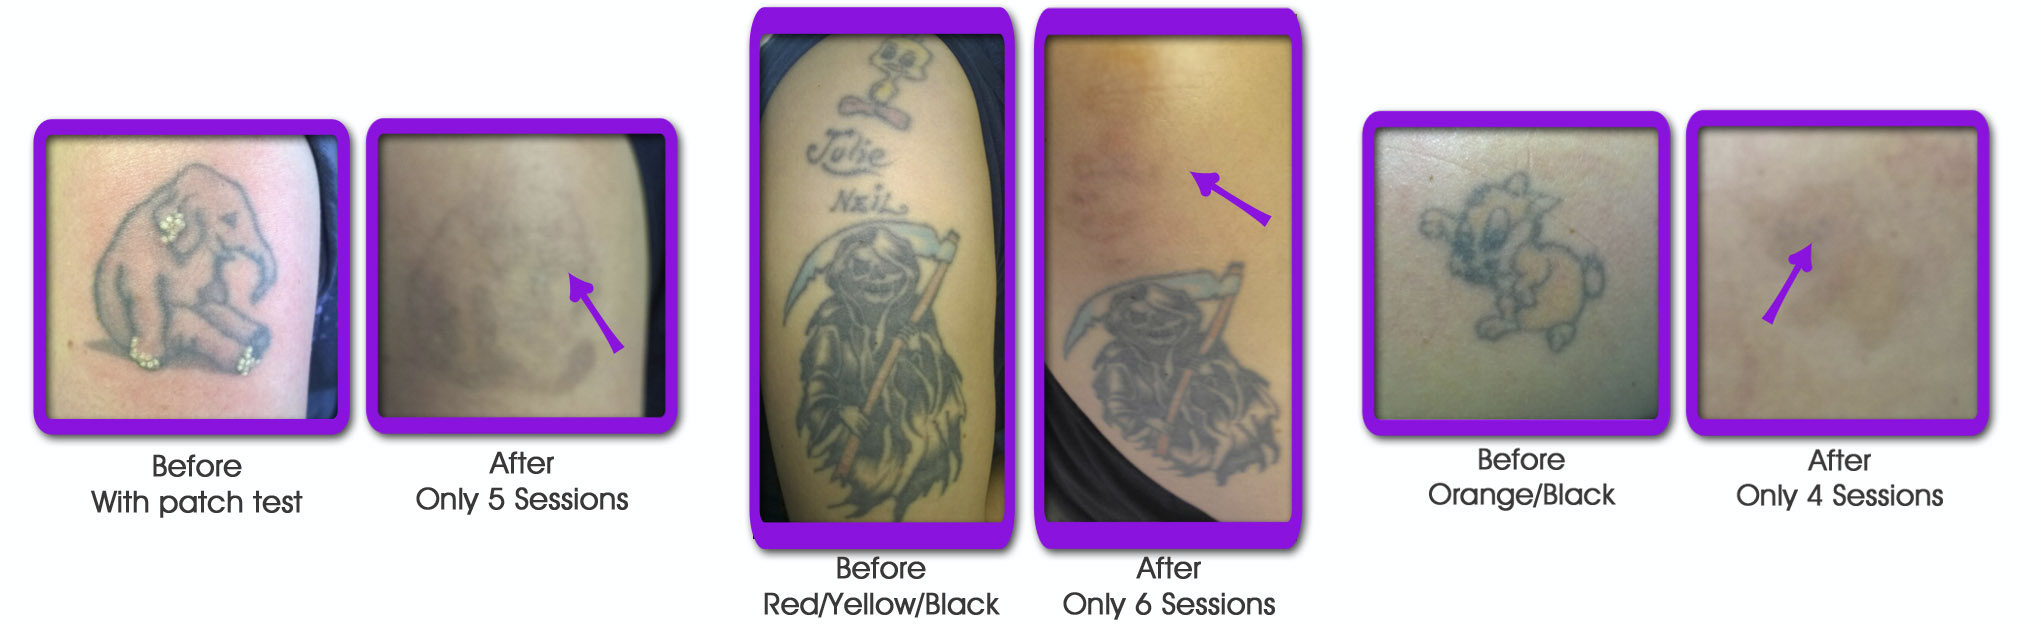 Laser tattoo removal York - Ruby laser Hull clinic